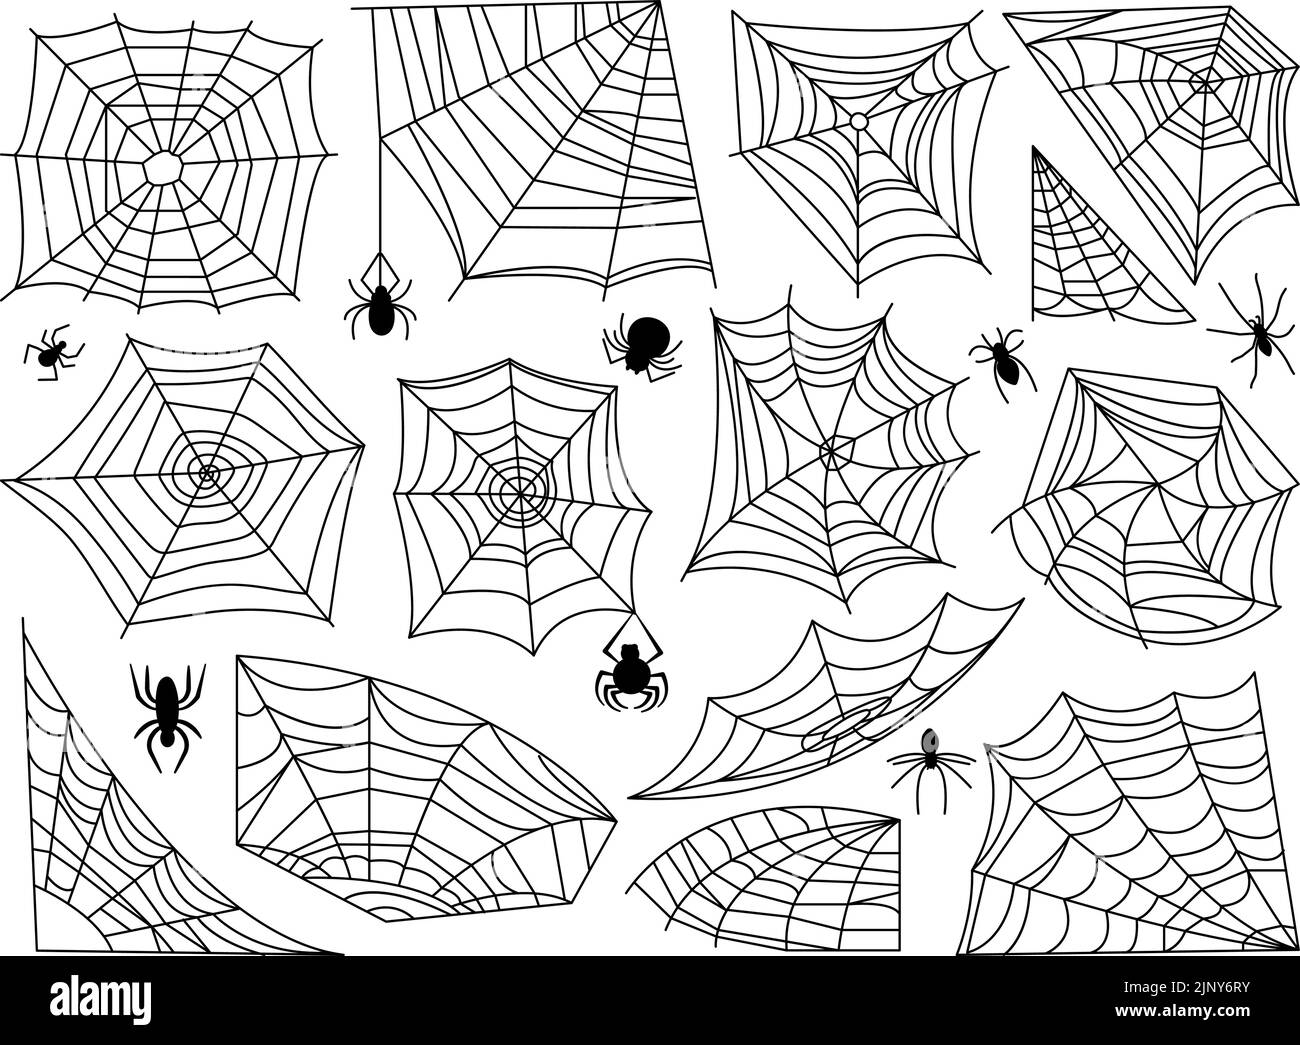 Isolated spider web and spiders black set. Halloween graphics, cobweb corners and full nets. Tattoo or border design, decent vector clipart Stock Vector